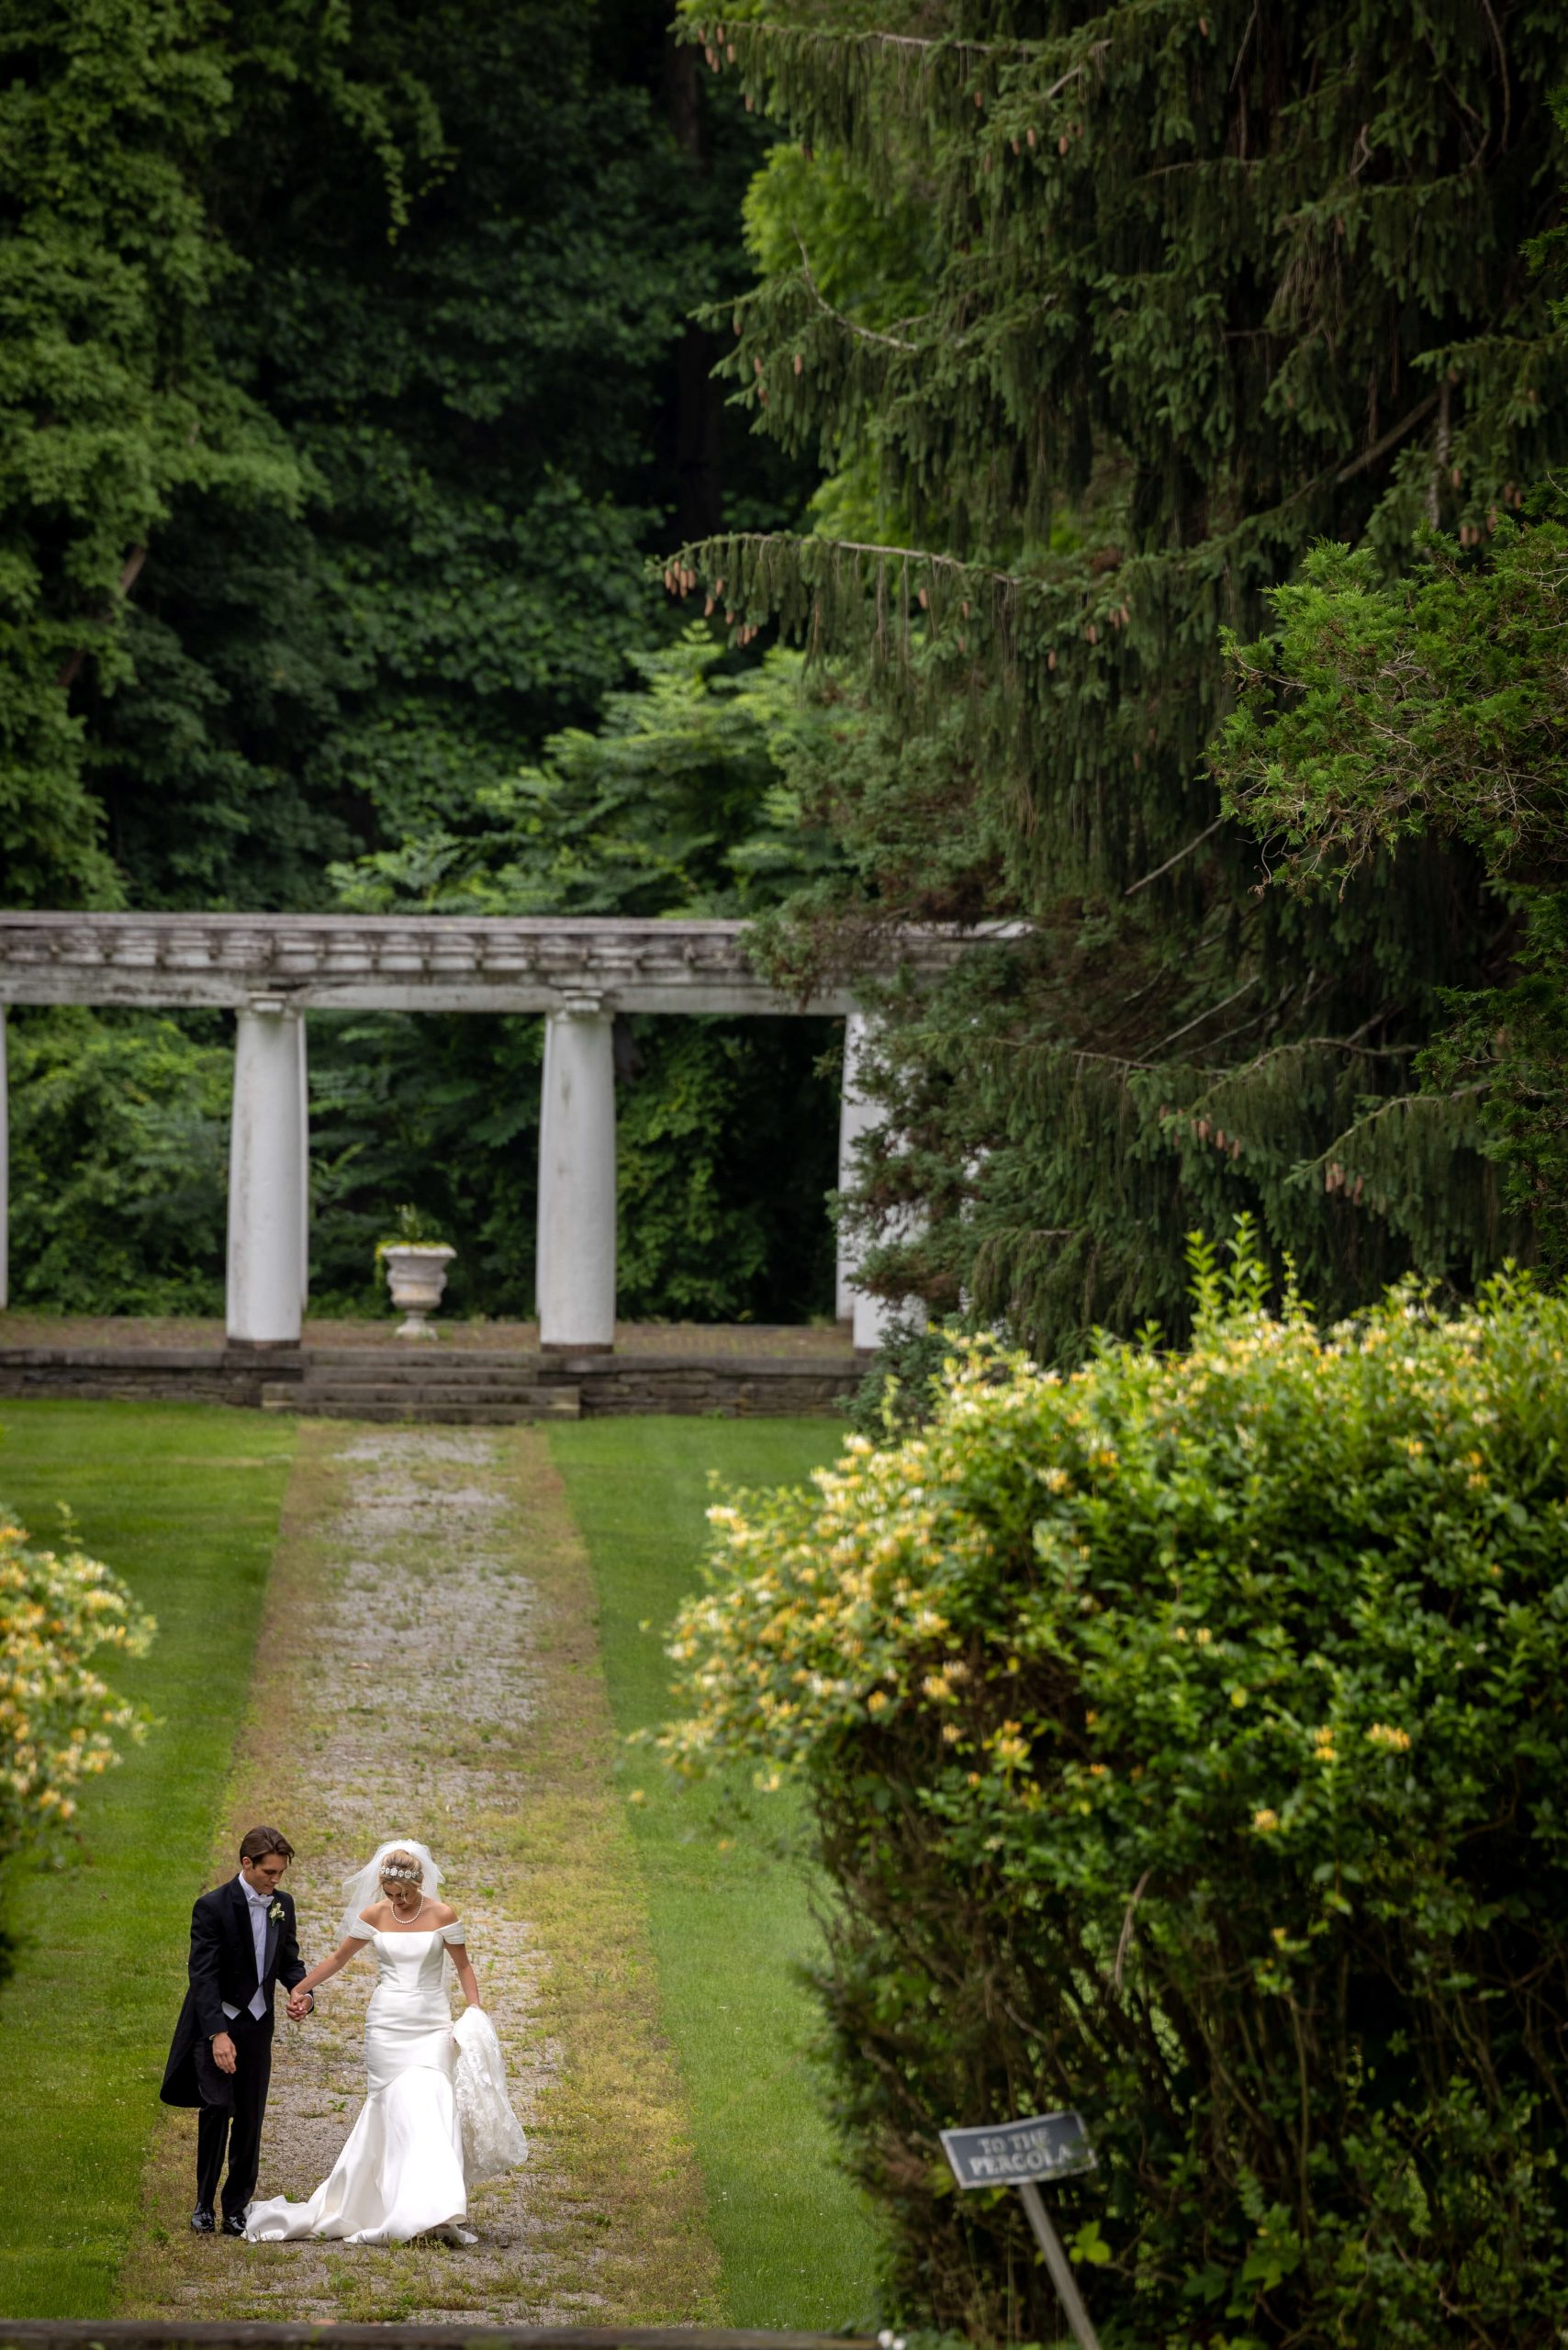 What Does Greystone Hall Offer as a Wedding Venue?